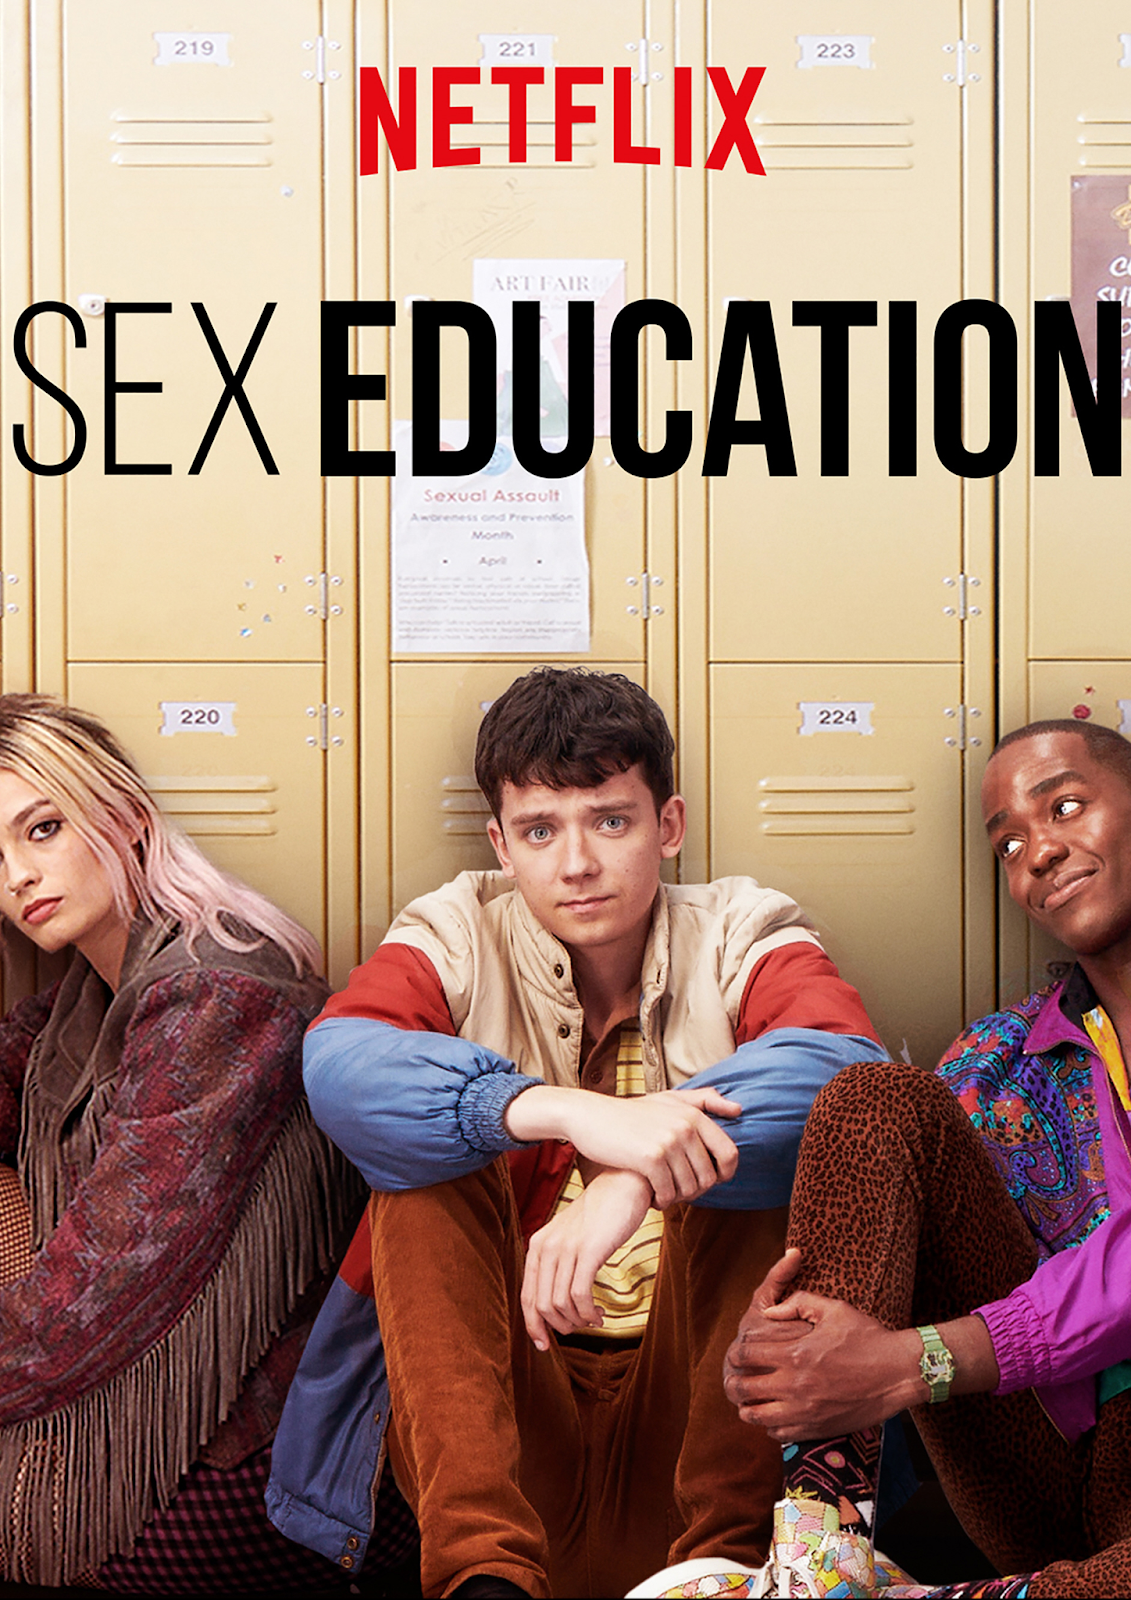 Is Netflix's Sex Education Doing Sex Education Better Than Most of the  Schools?